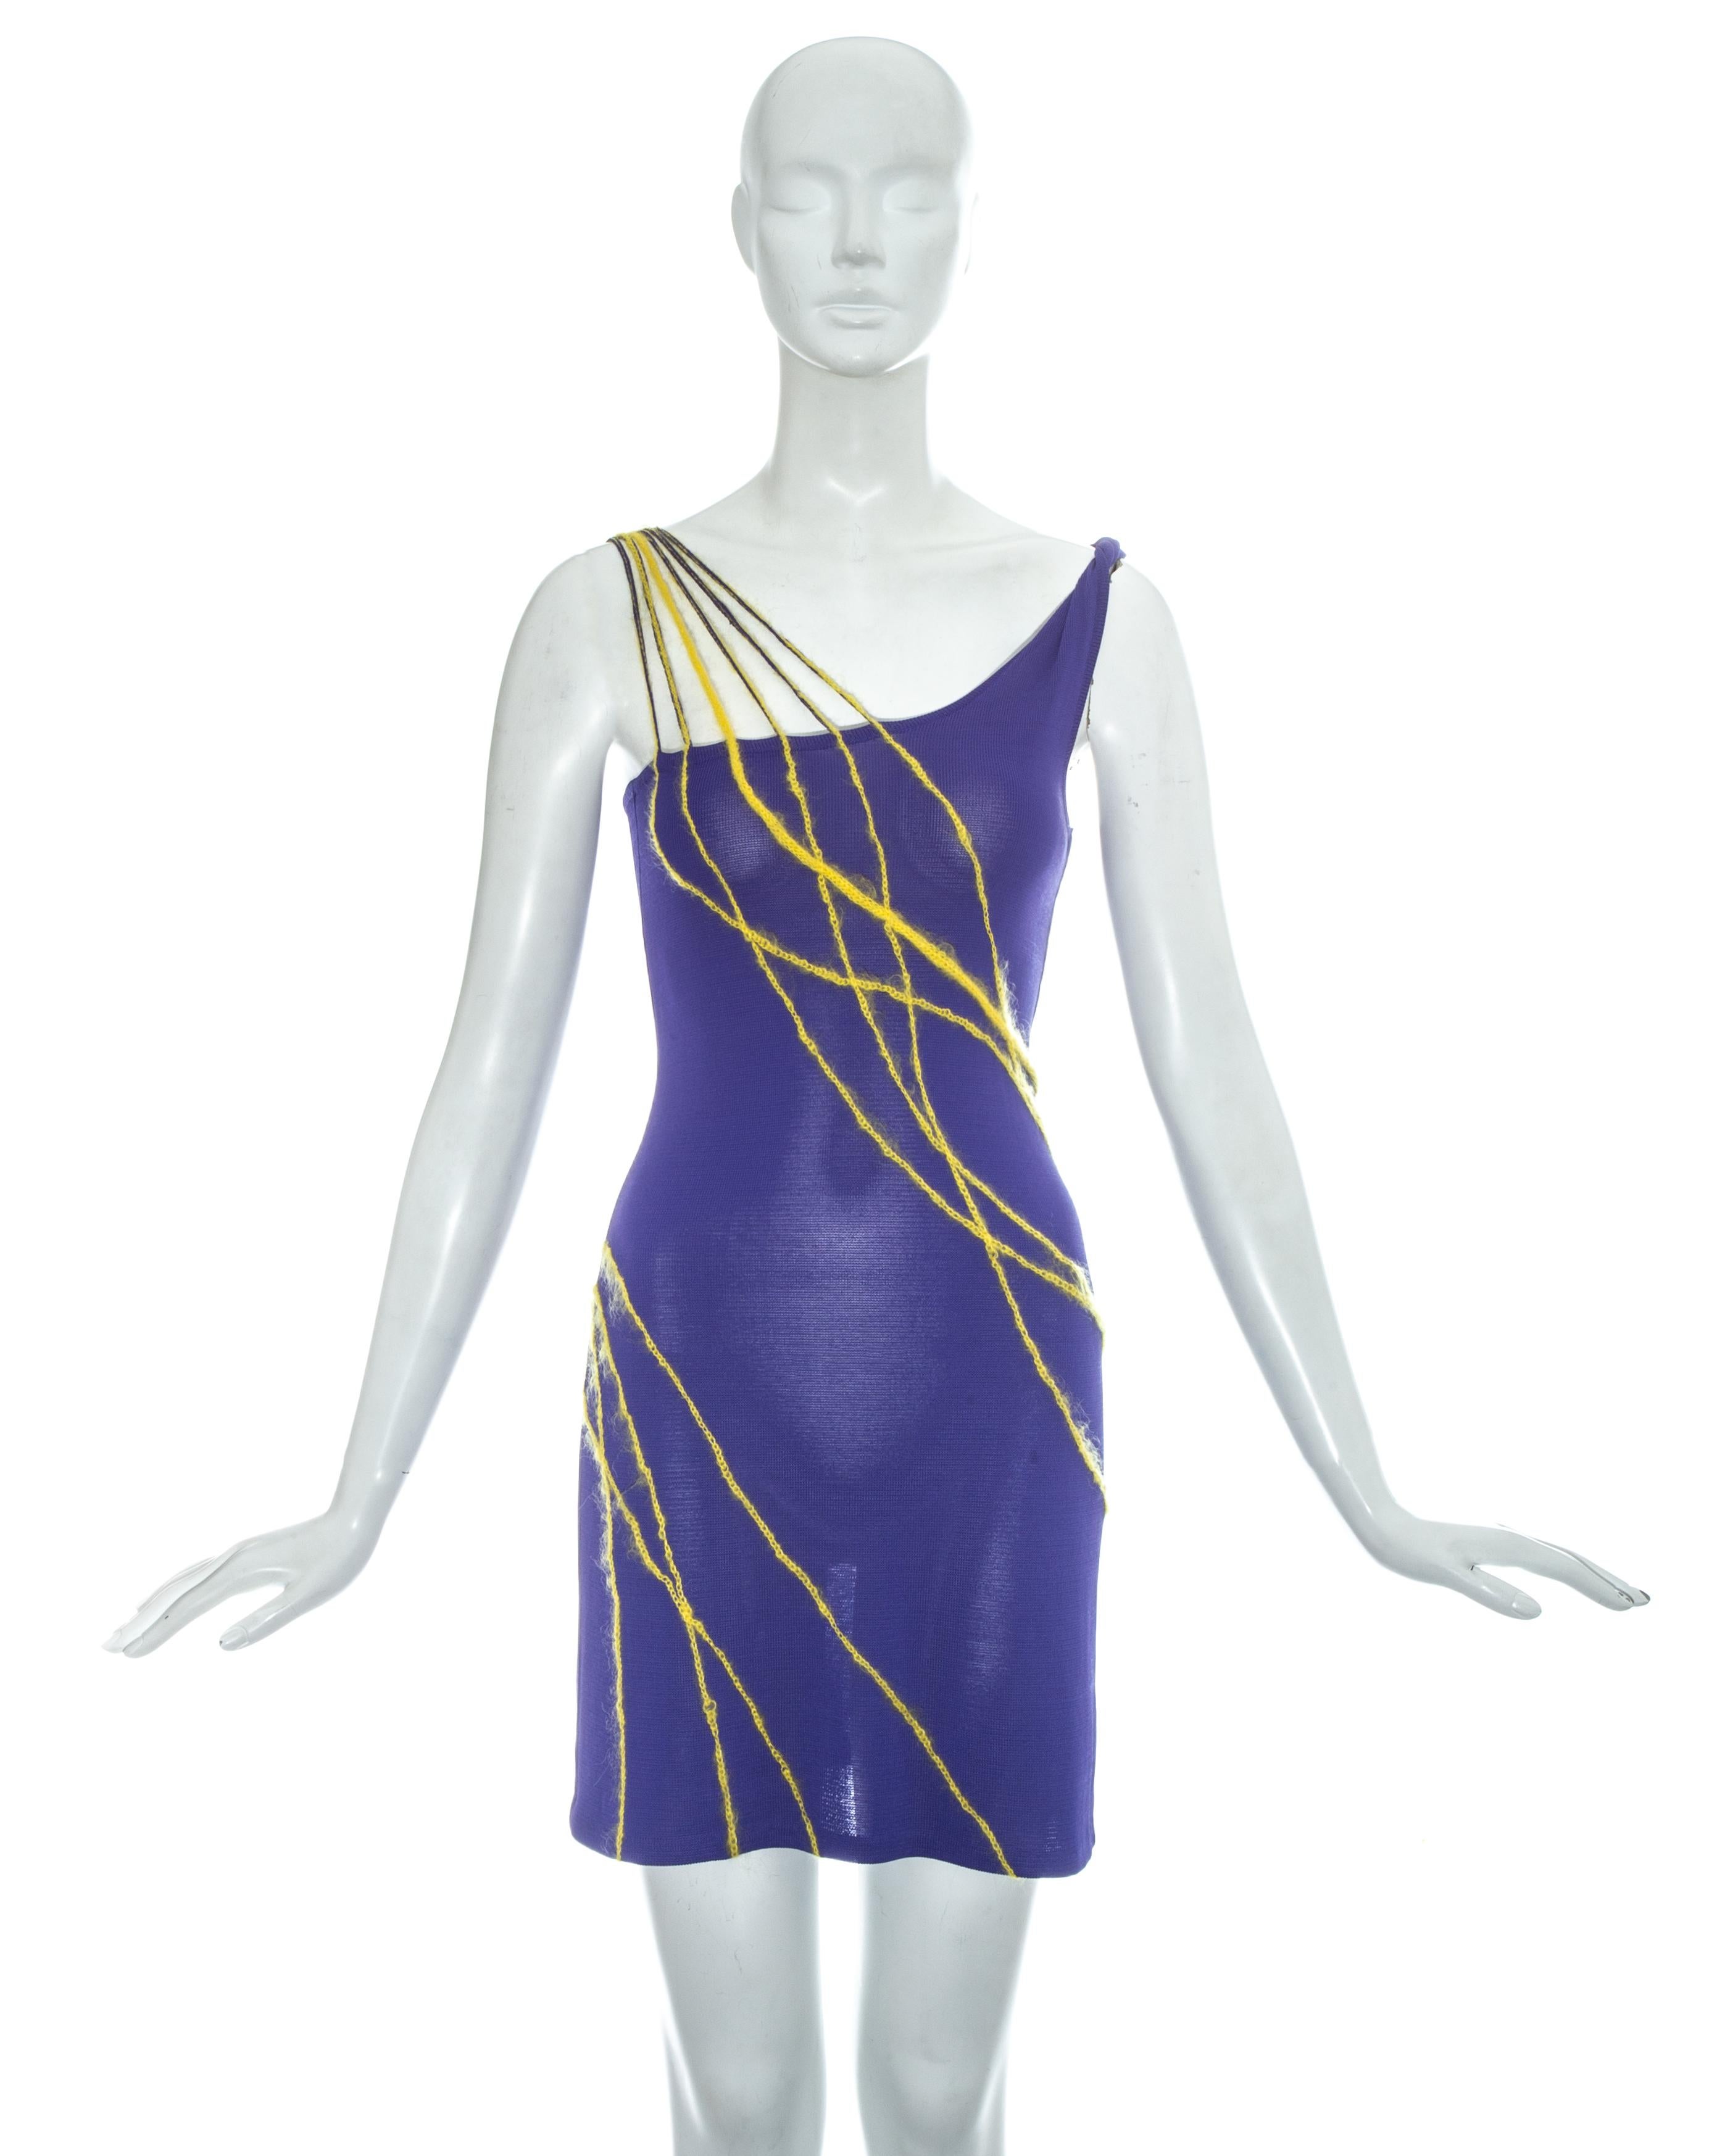 Gianni Versace purple rayon knitted mini dress with yellow mohair string straps and appliqués. 

Spring-Summer 1998